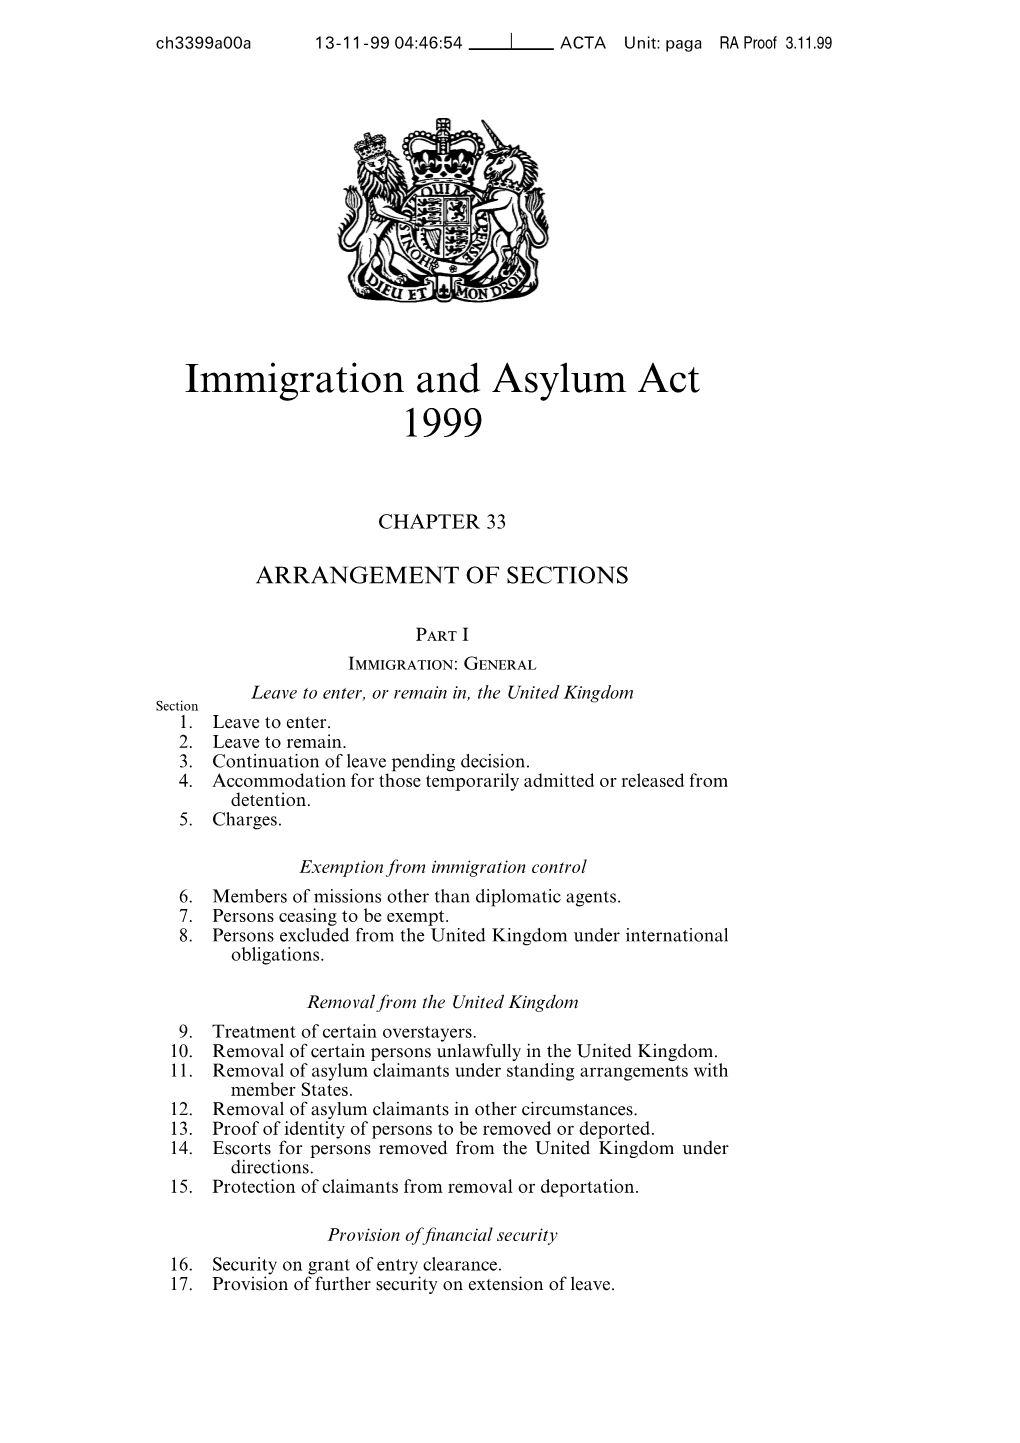 Immigration and Asylum Act 1999